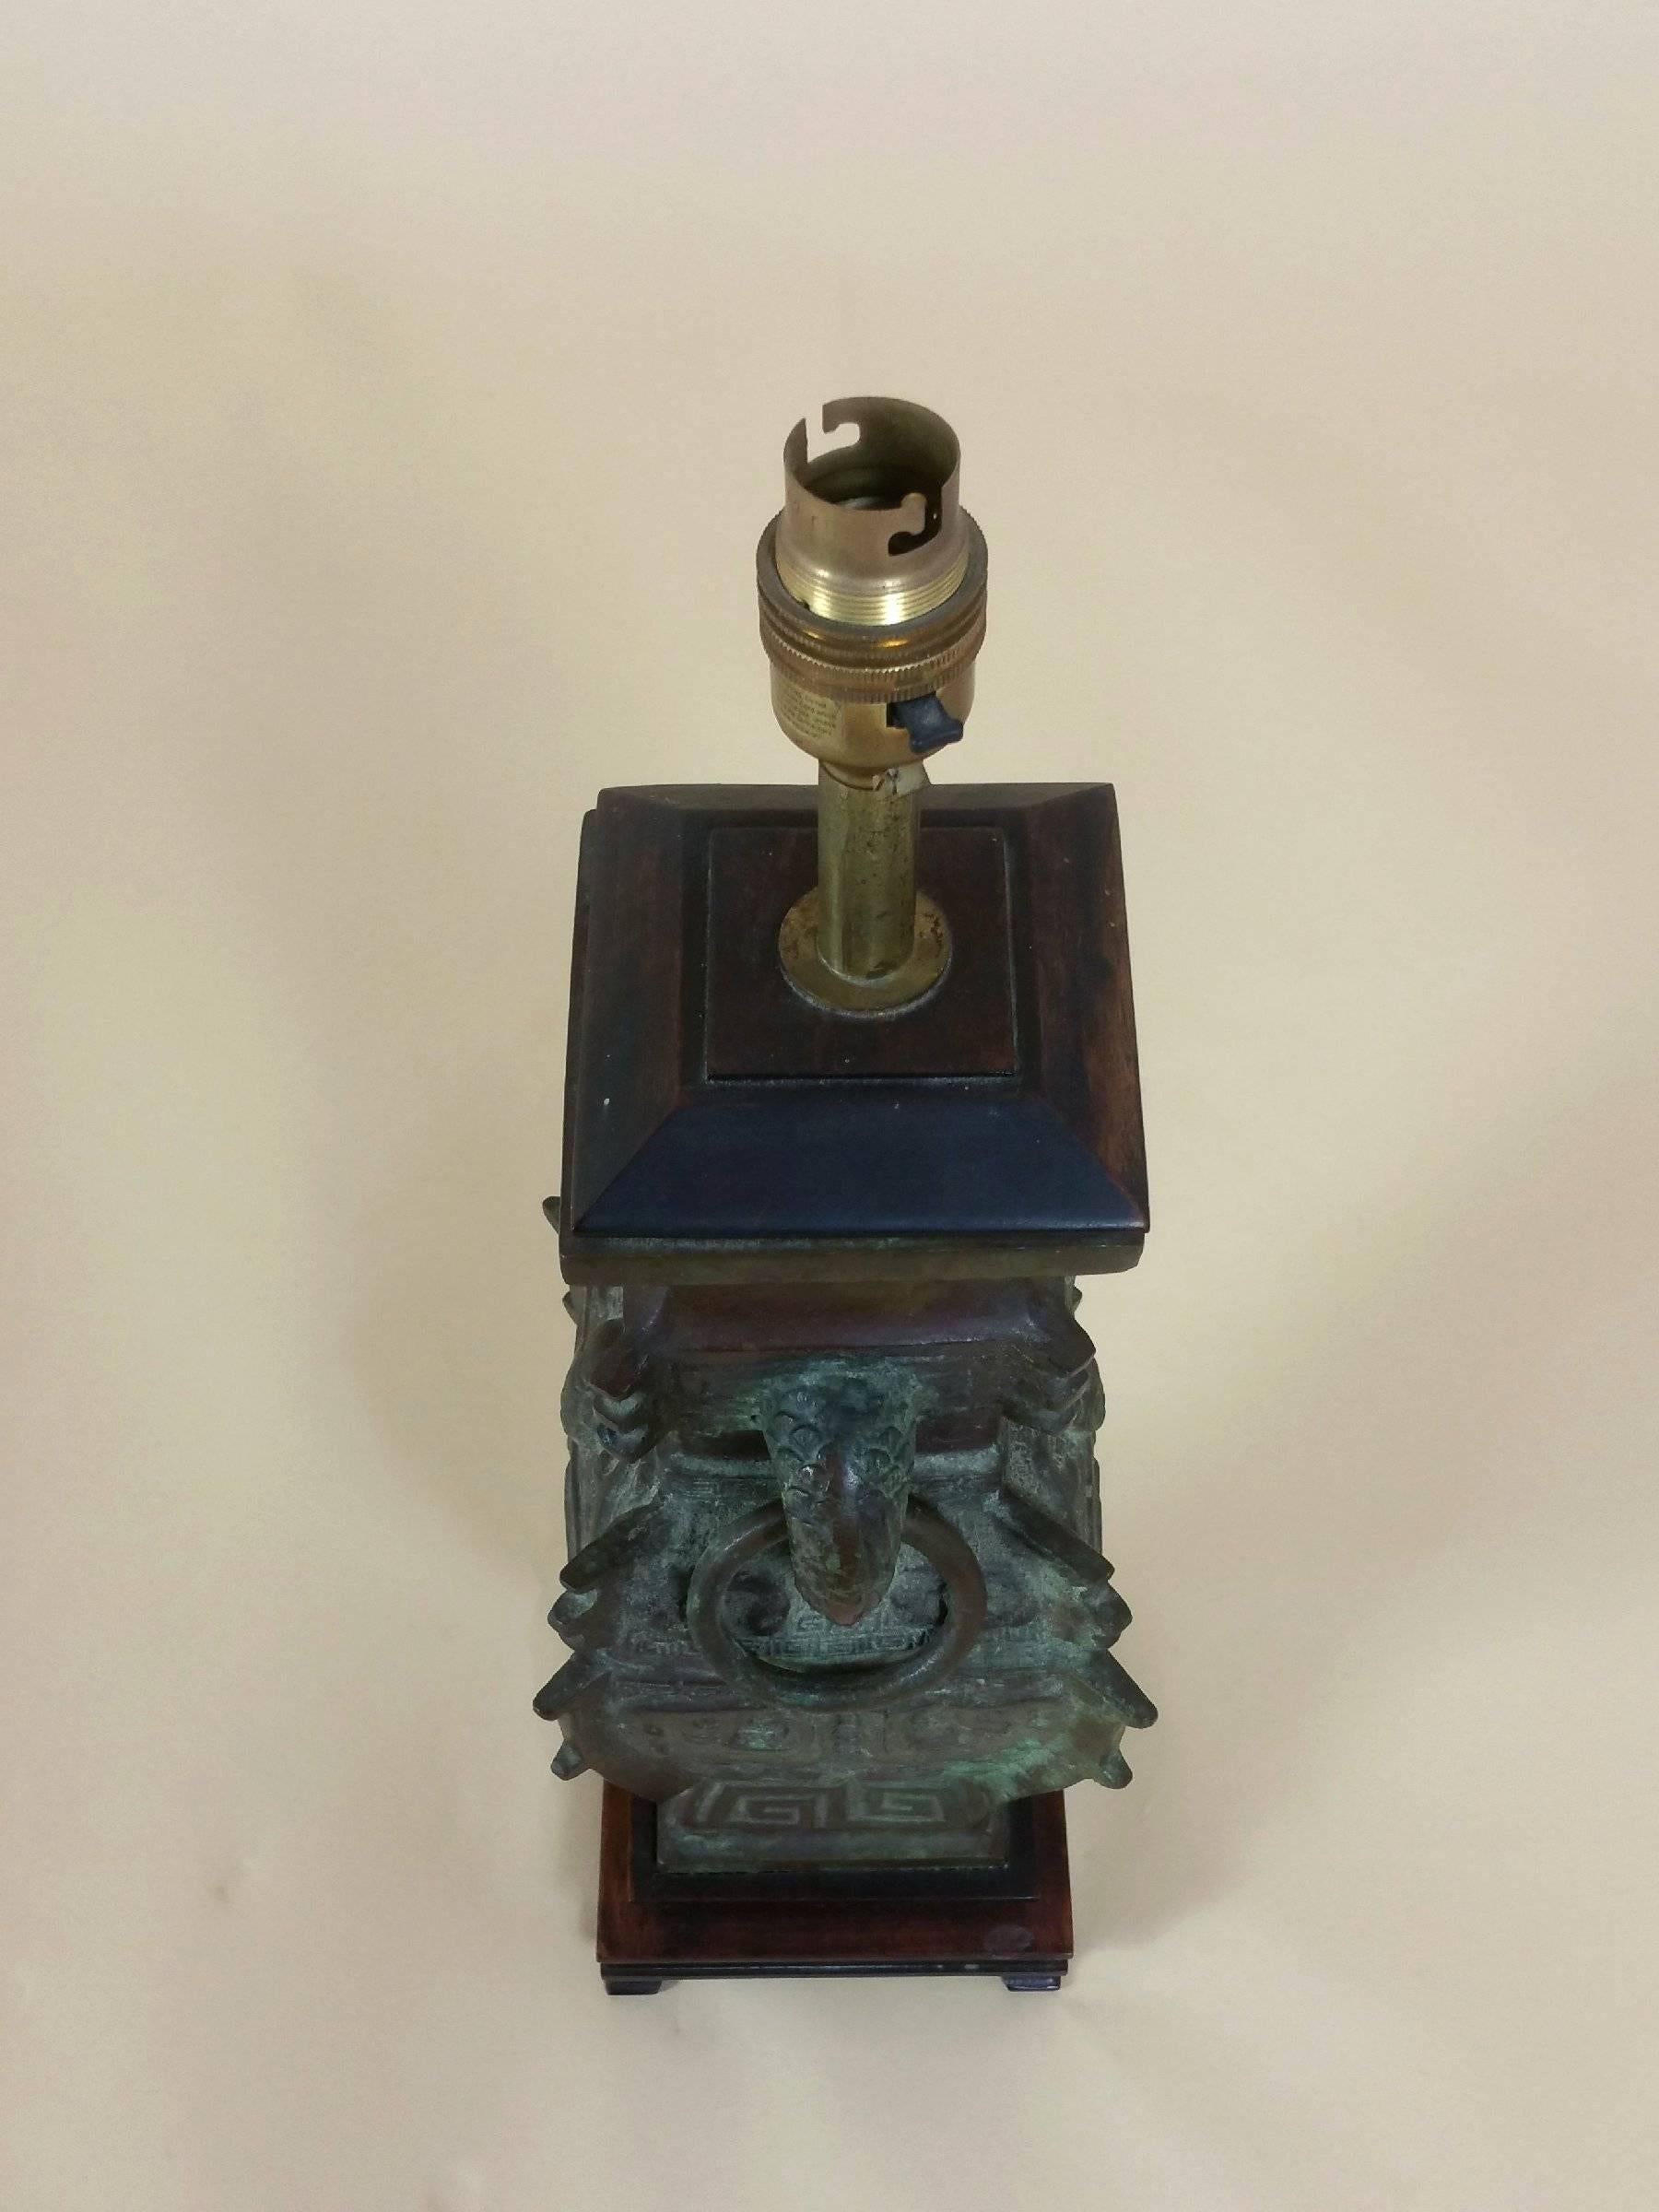 This unique and handsome Chinese archaic style bronze vase has been converted to a table lamp and is circa 1900. The lamp features a lovely patina and is mounted on a hardwood base. It measures 5 ¼ in – 13.3 cm wide, 4 ¾ in – 12 cm deep and 18 ½ in